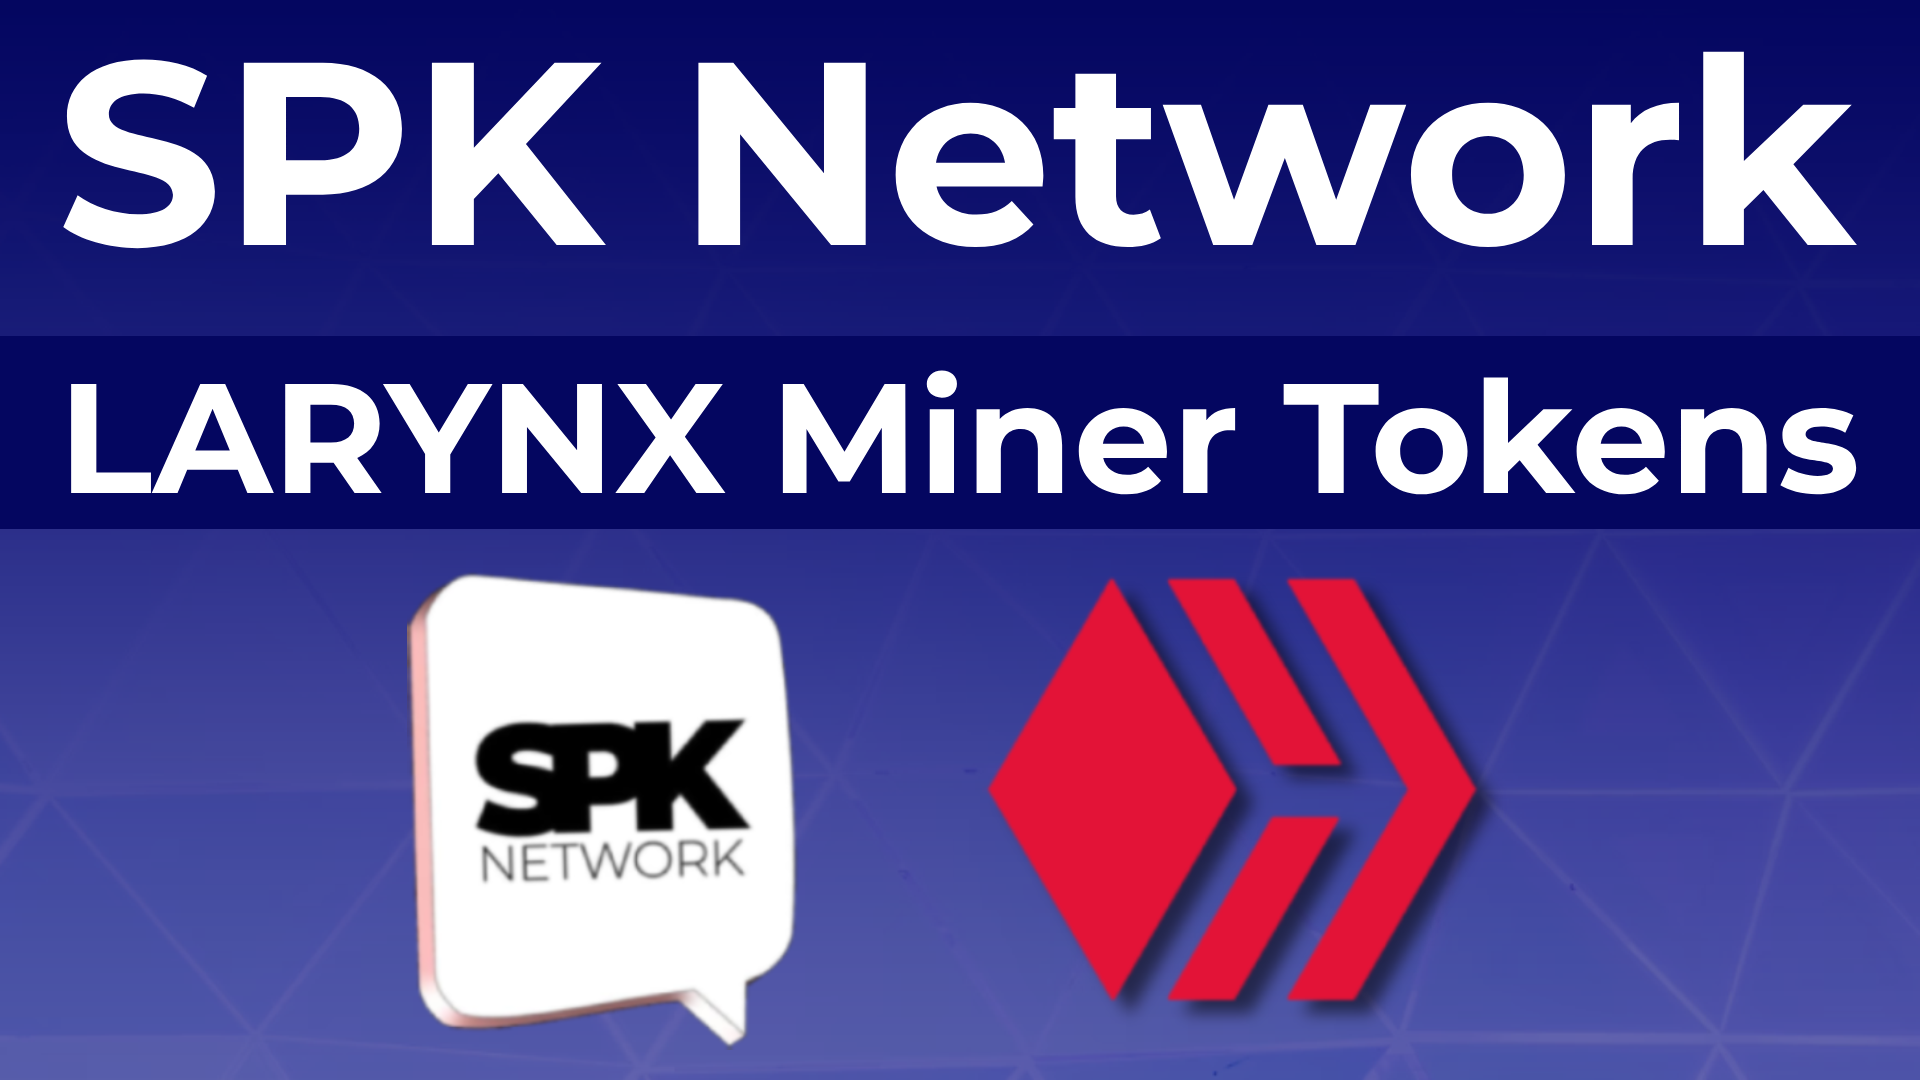 @spknetwork/what-exactly-are-larynx-miner-tokens